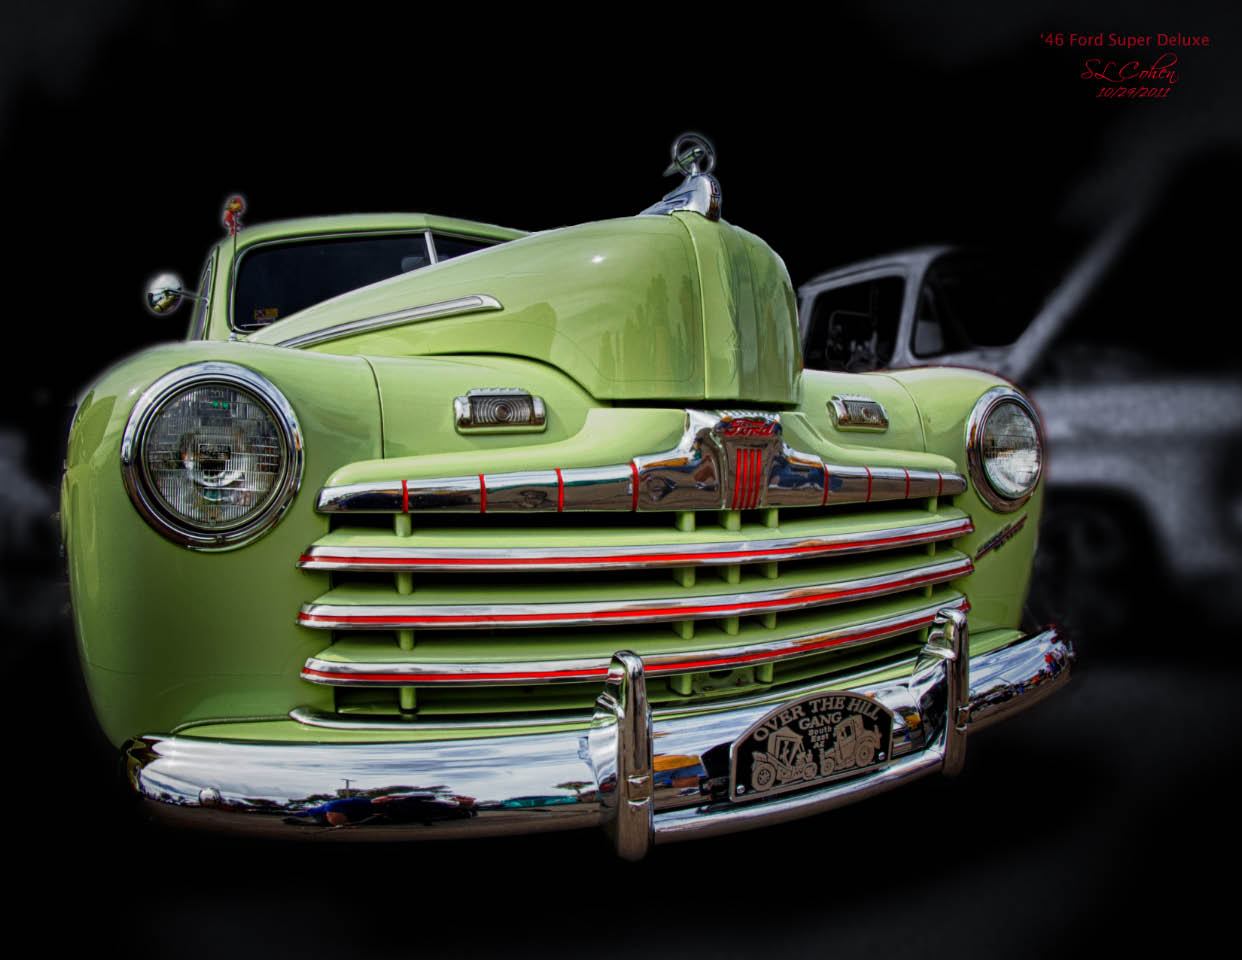 46 Ford Super Deluxe #2